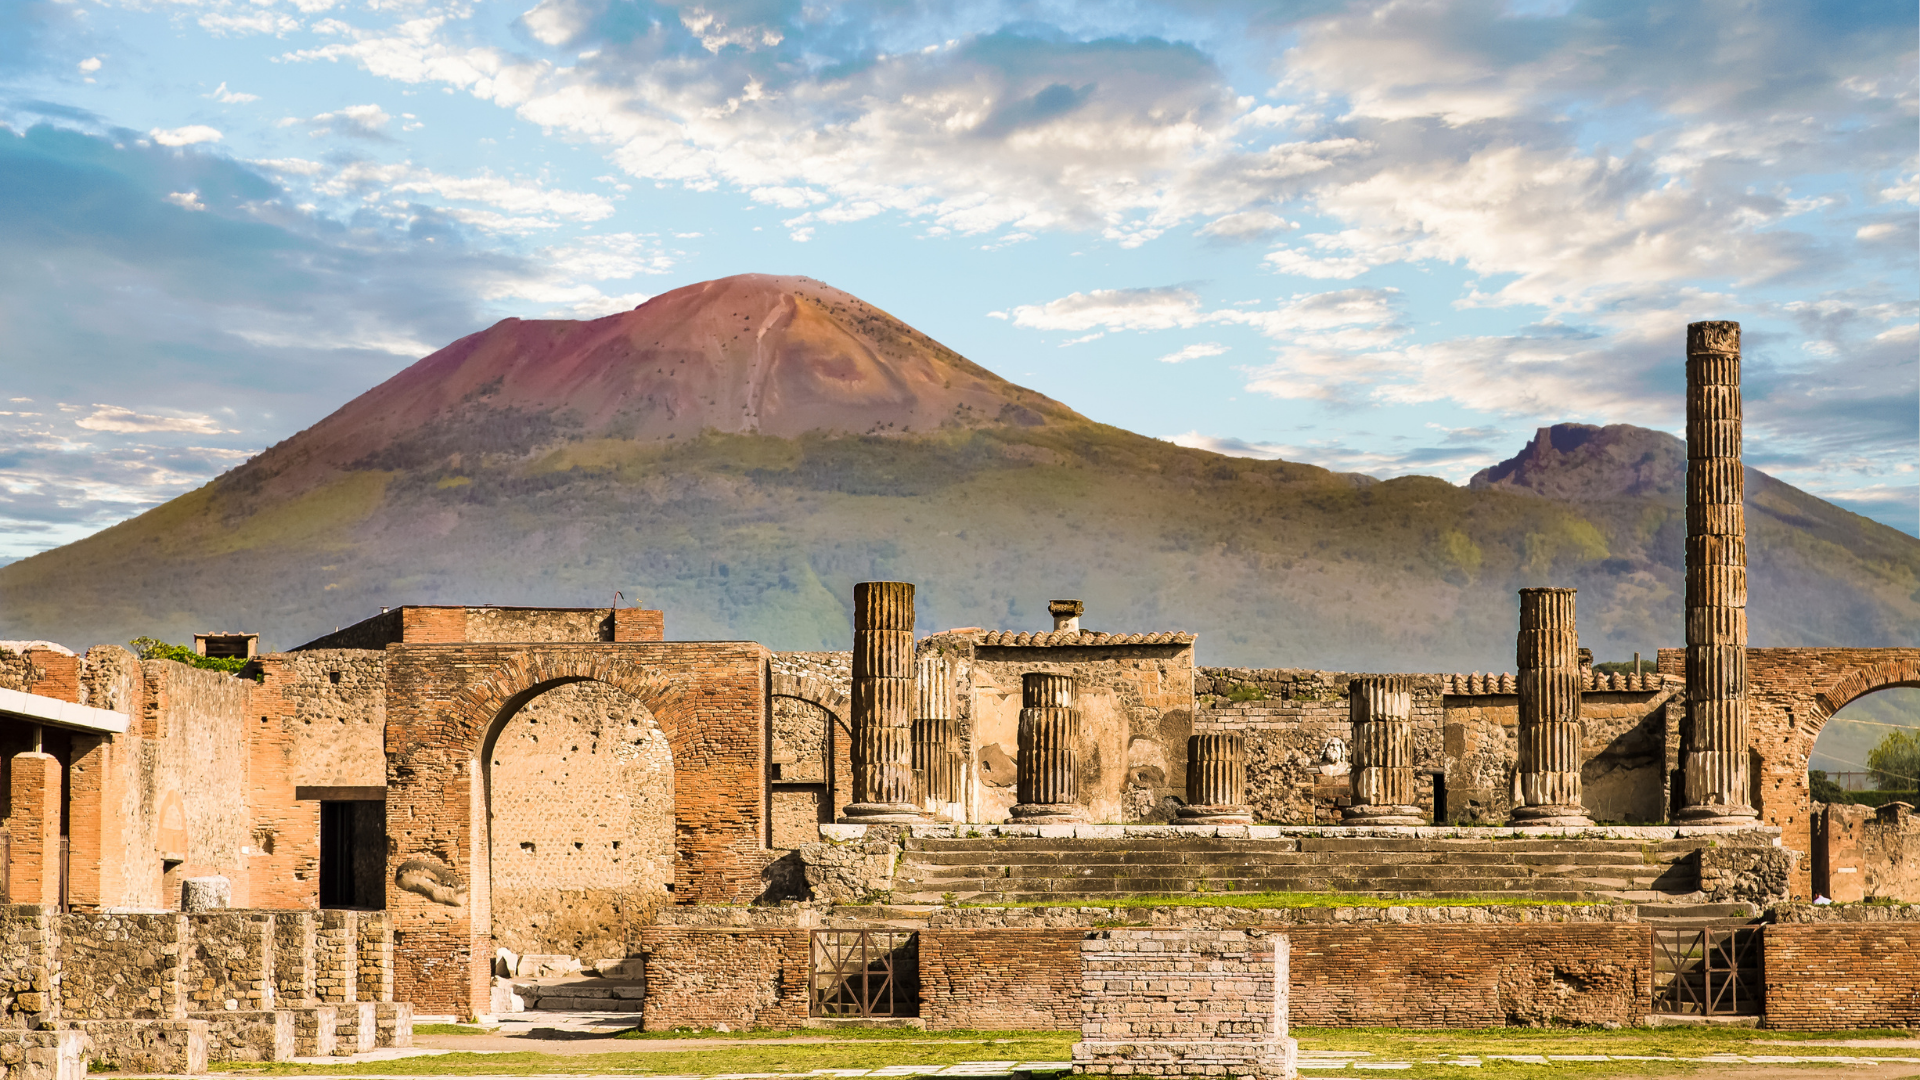 New discoveries at Pompeii teach of ancient life featured image